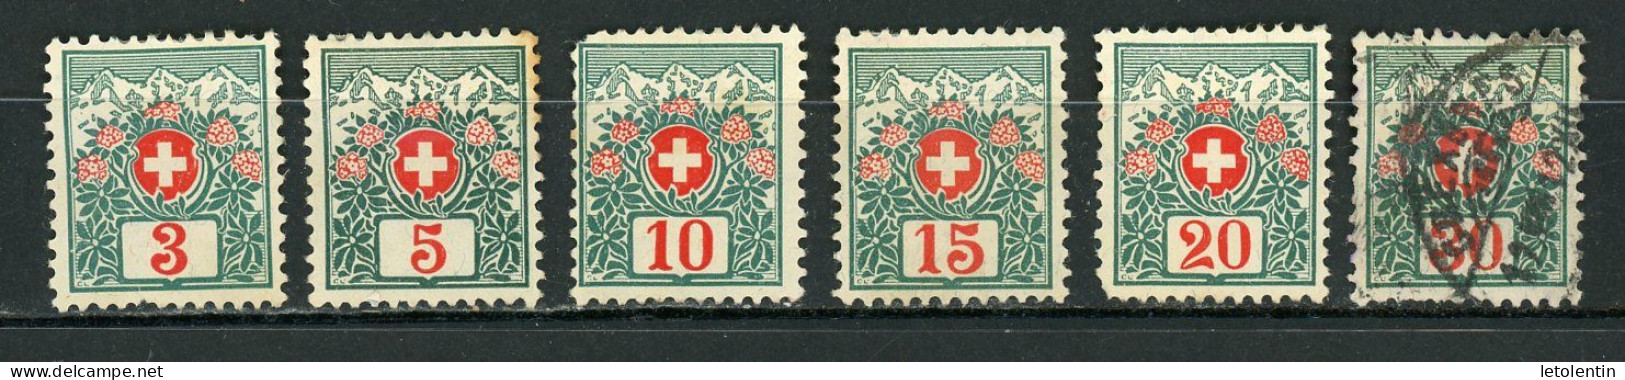 SUISSE - TIMBRE TAXE - N° Yt 43+44+45+46+47 (*) + 48 Obli. - Postage Due